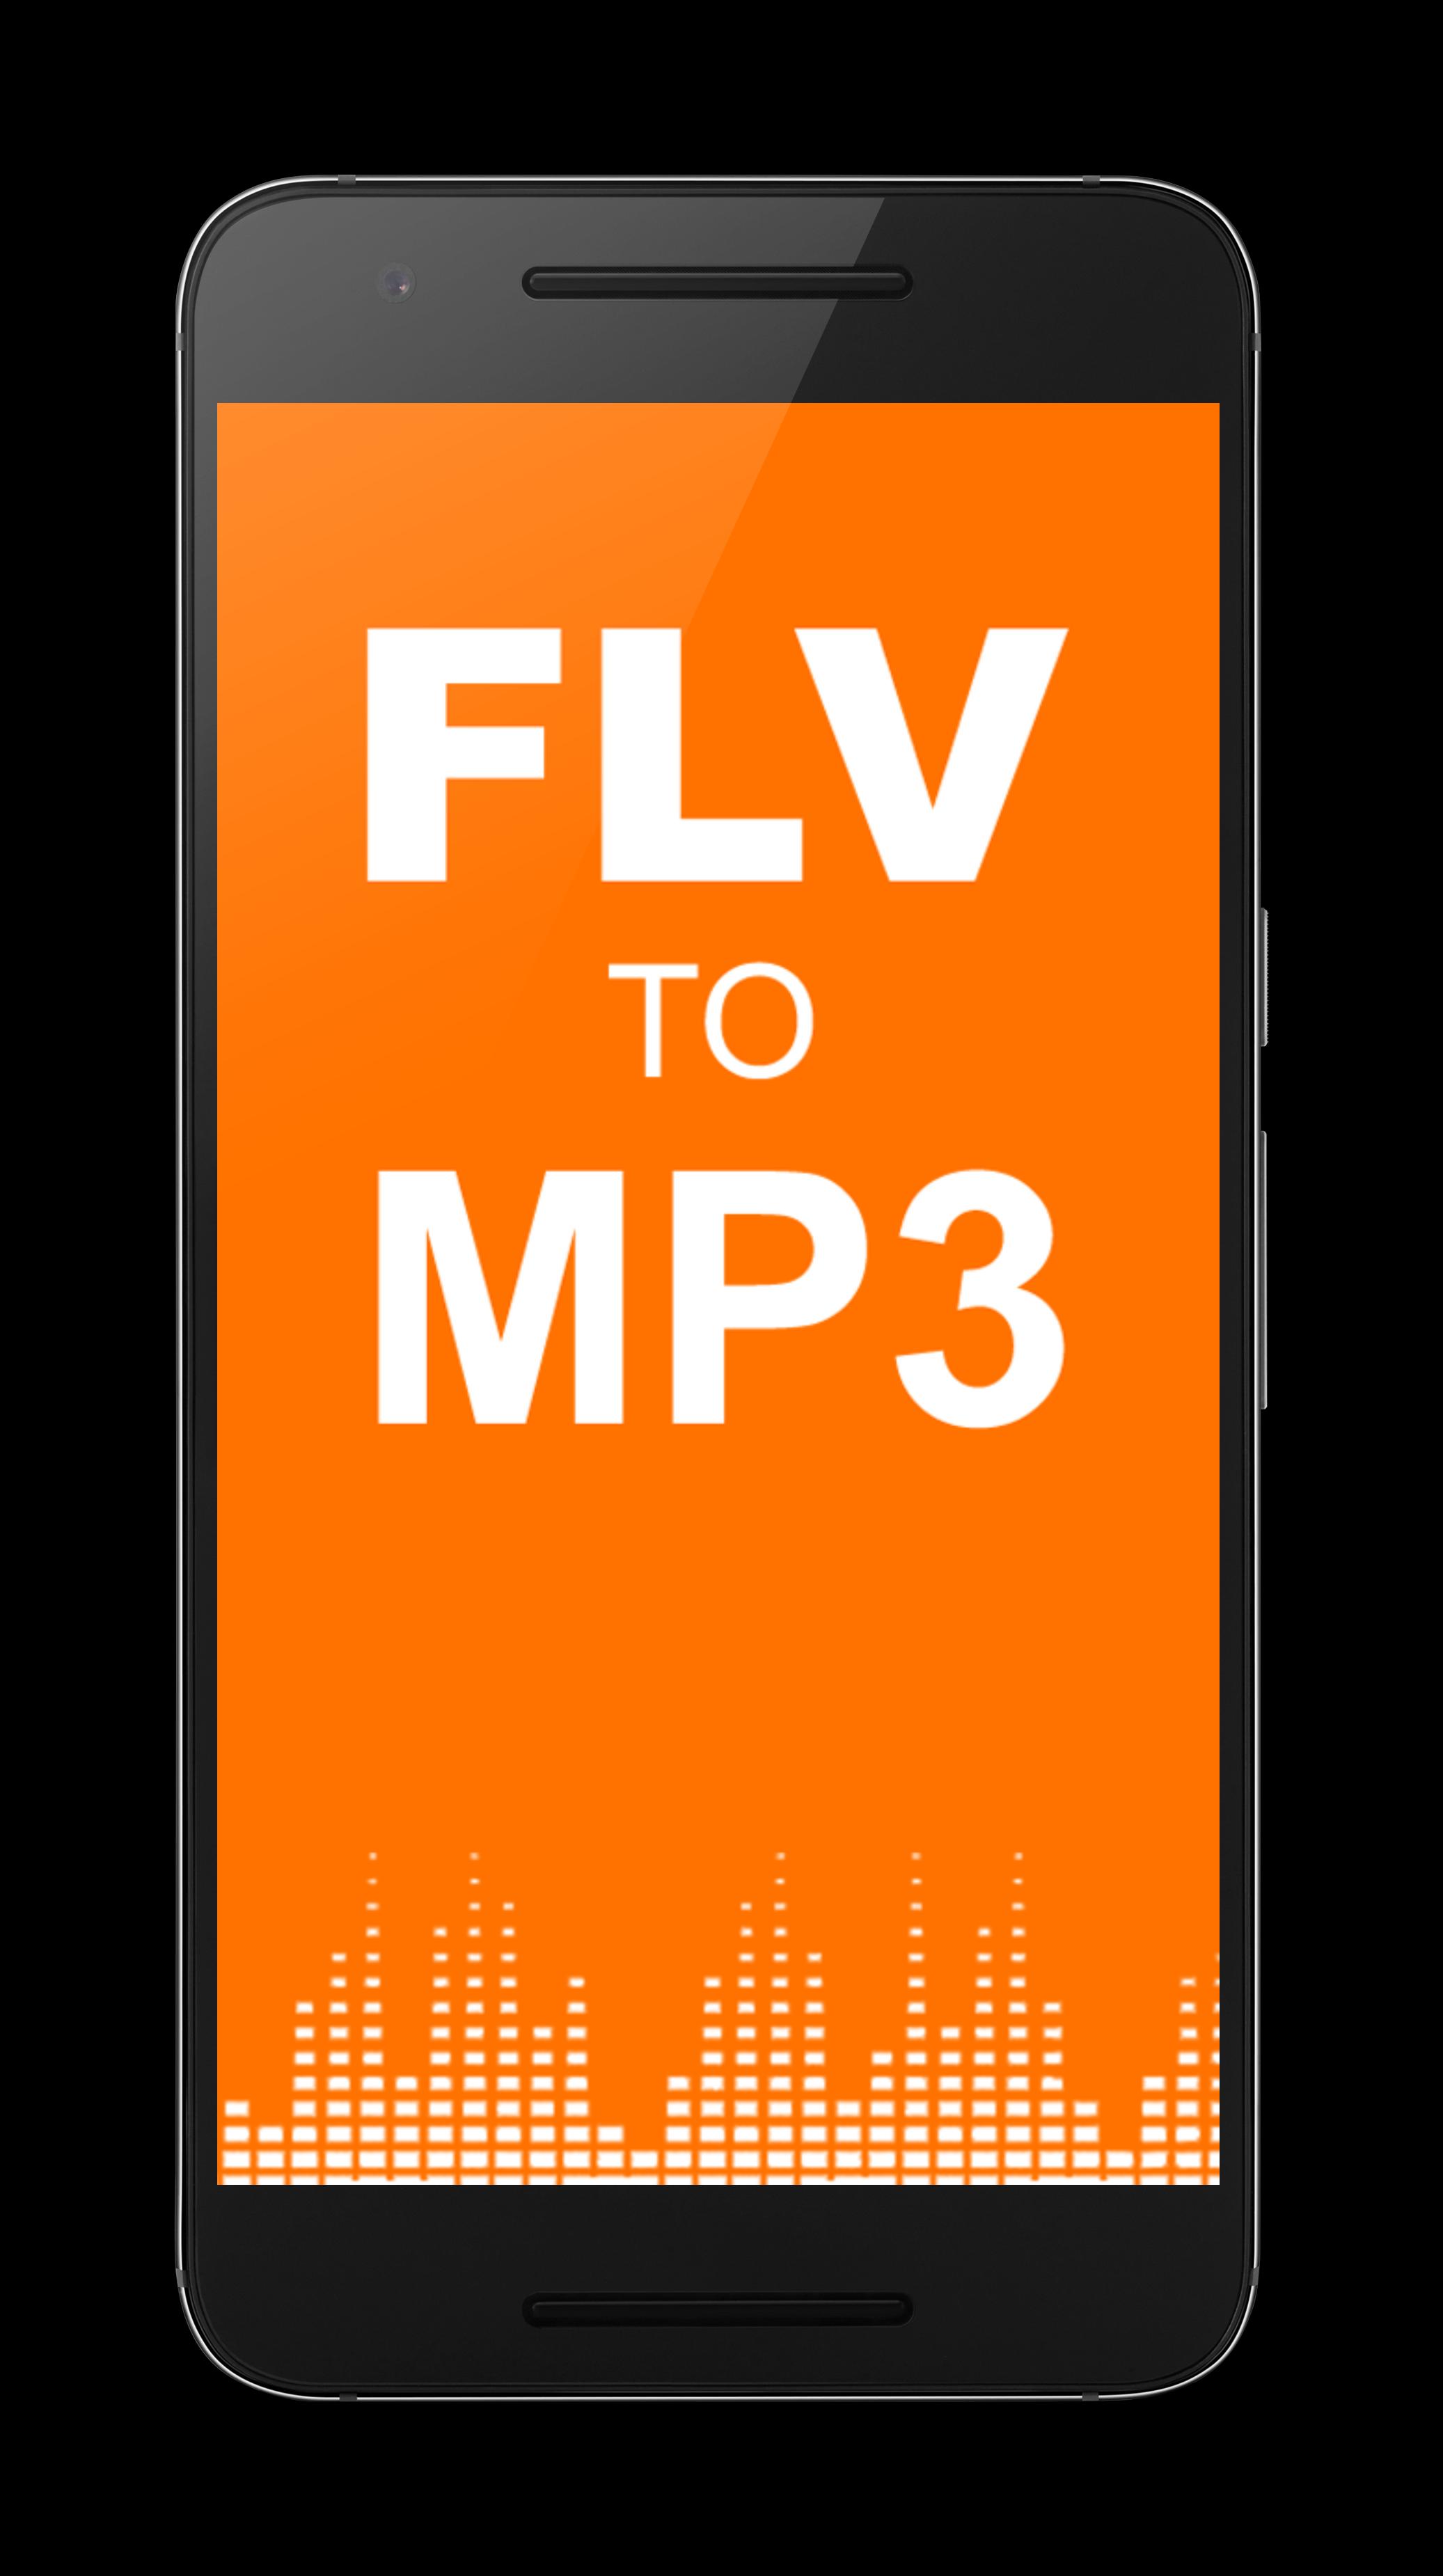 FLV to MP3 Converter for Android - APK Download